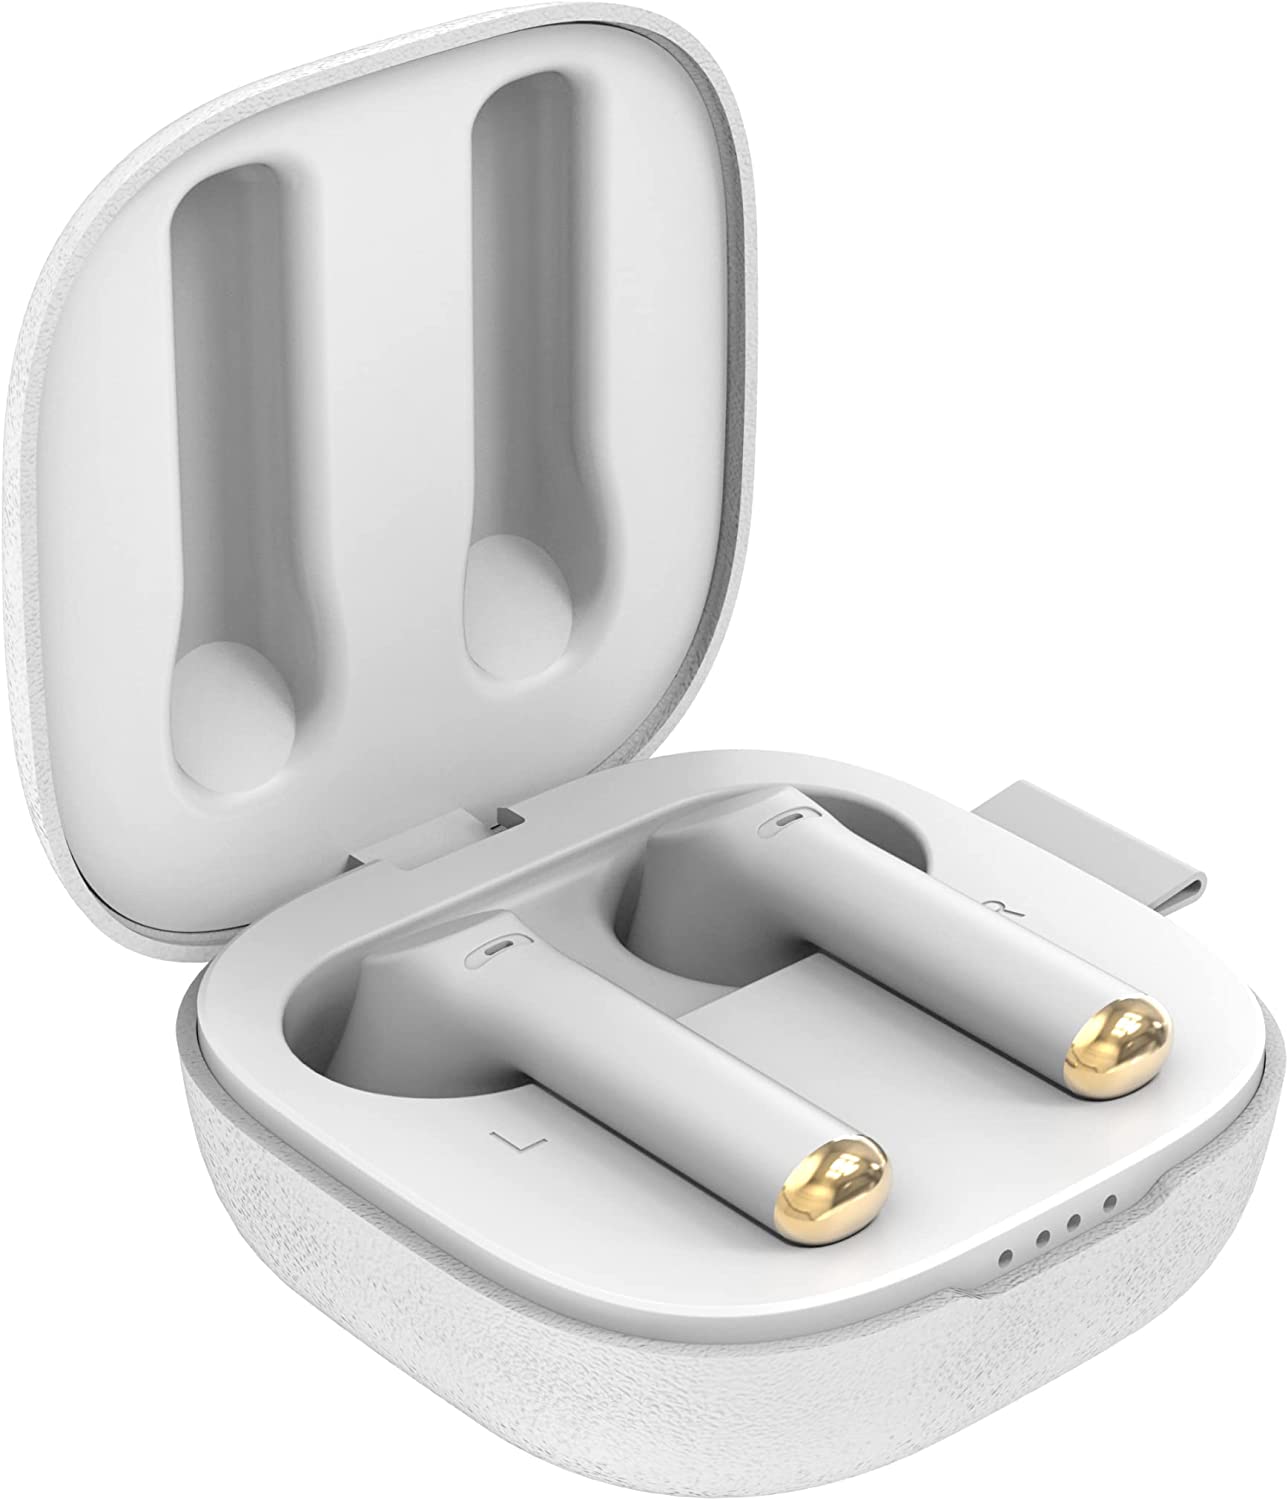 10 Best AirPod Alternatives for iPhone & iPad 4